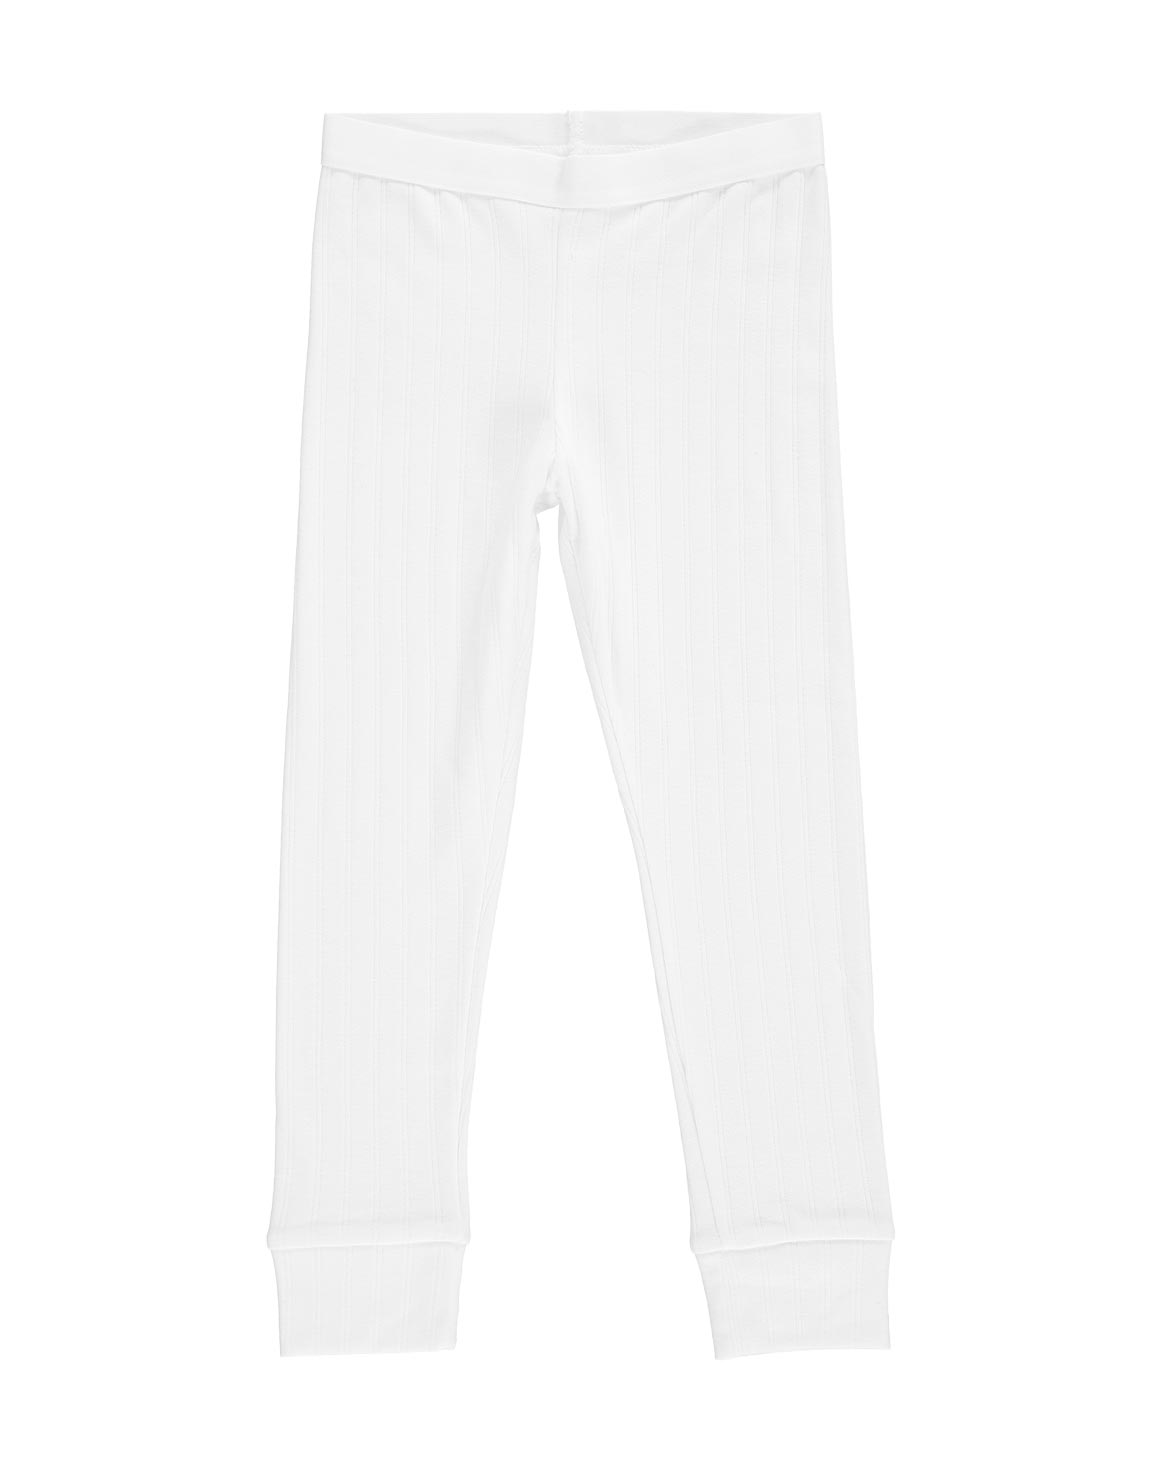 Thermal Long Johns - Woolworths Mauritius Online